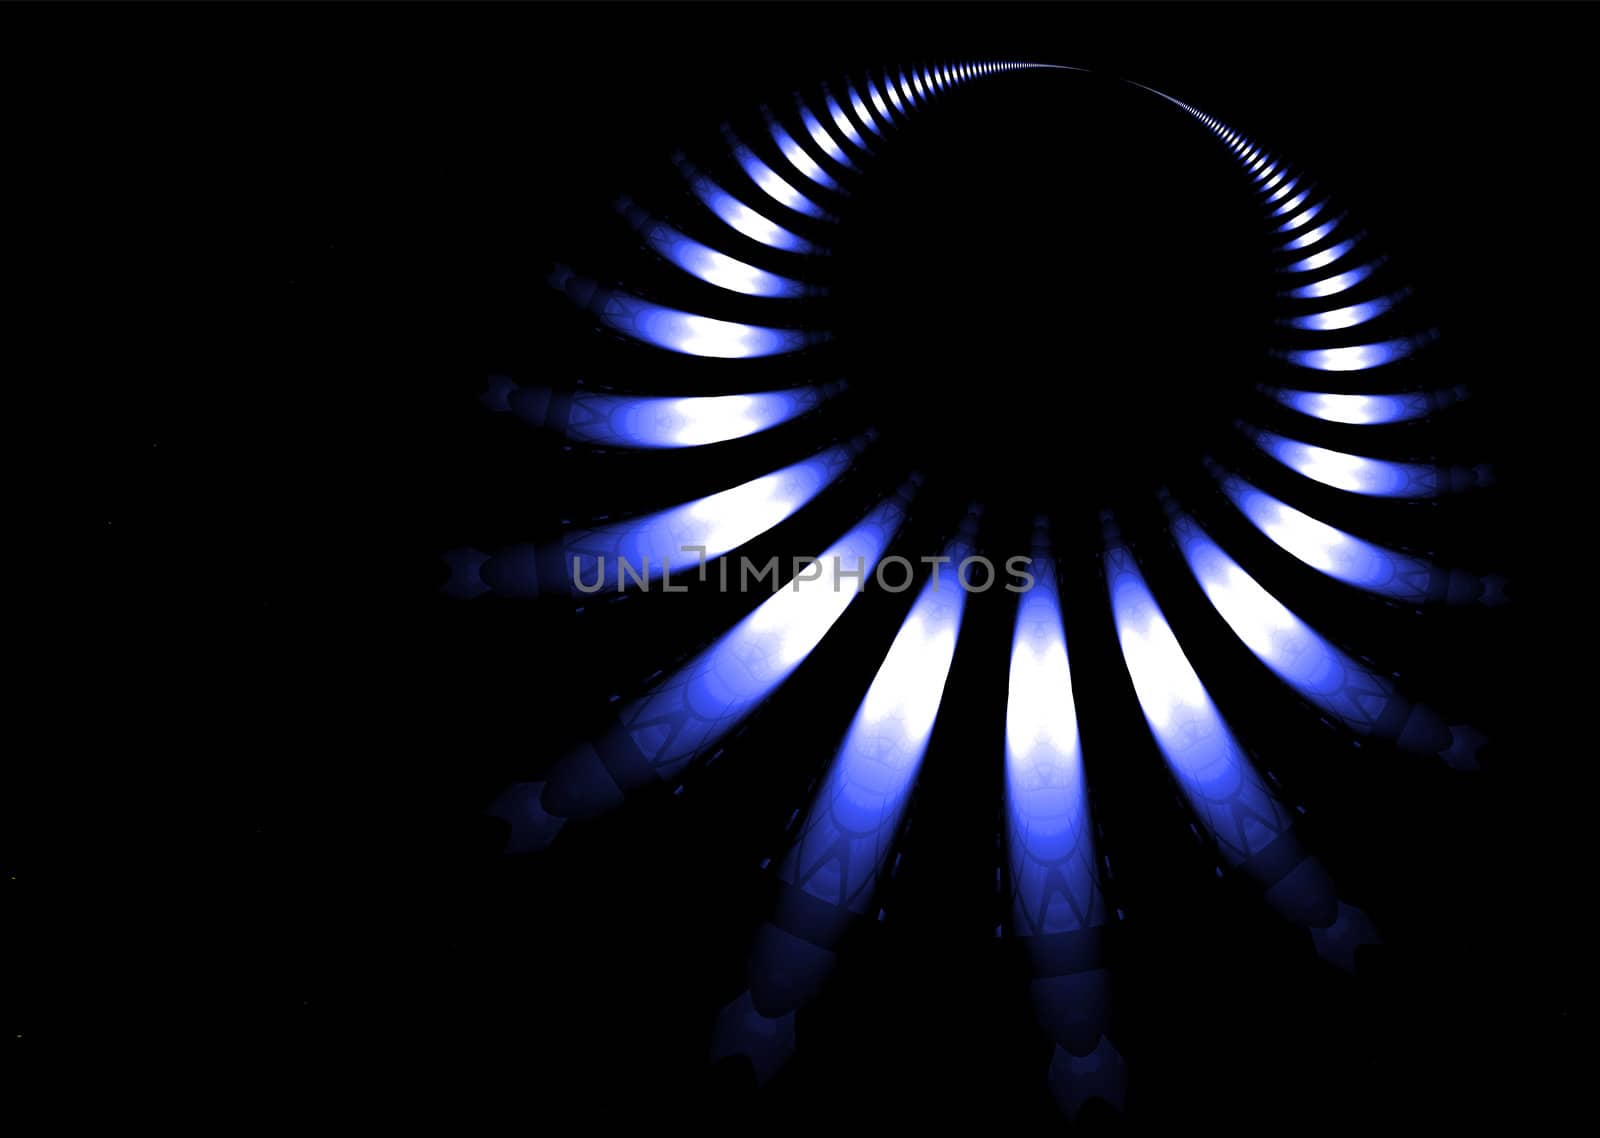 Gas ring abstract background in blue and black